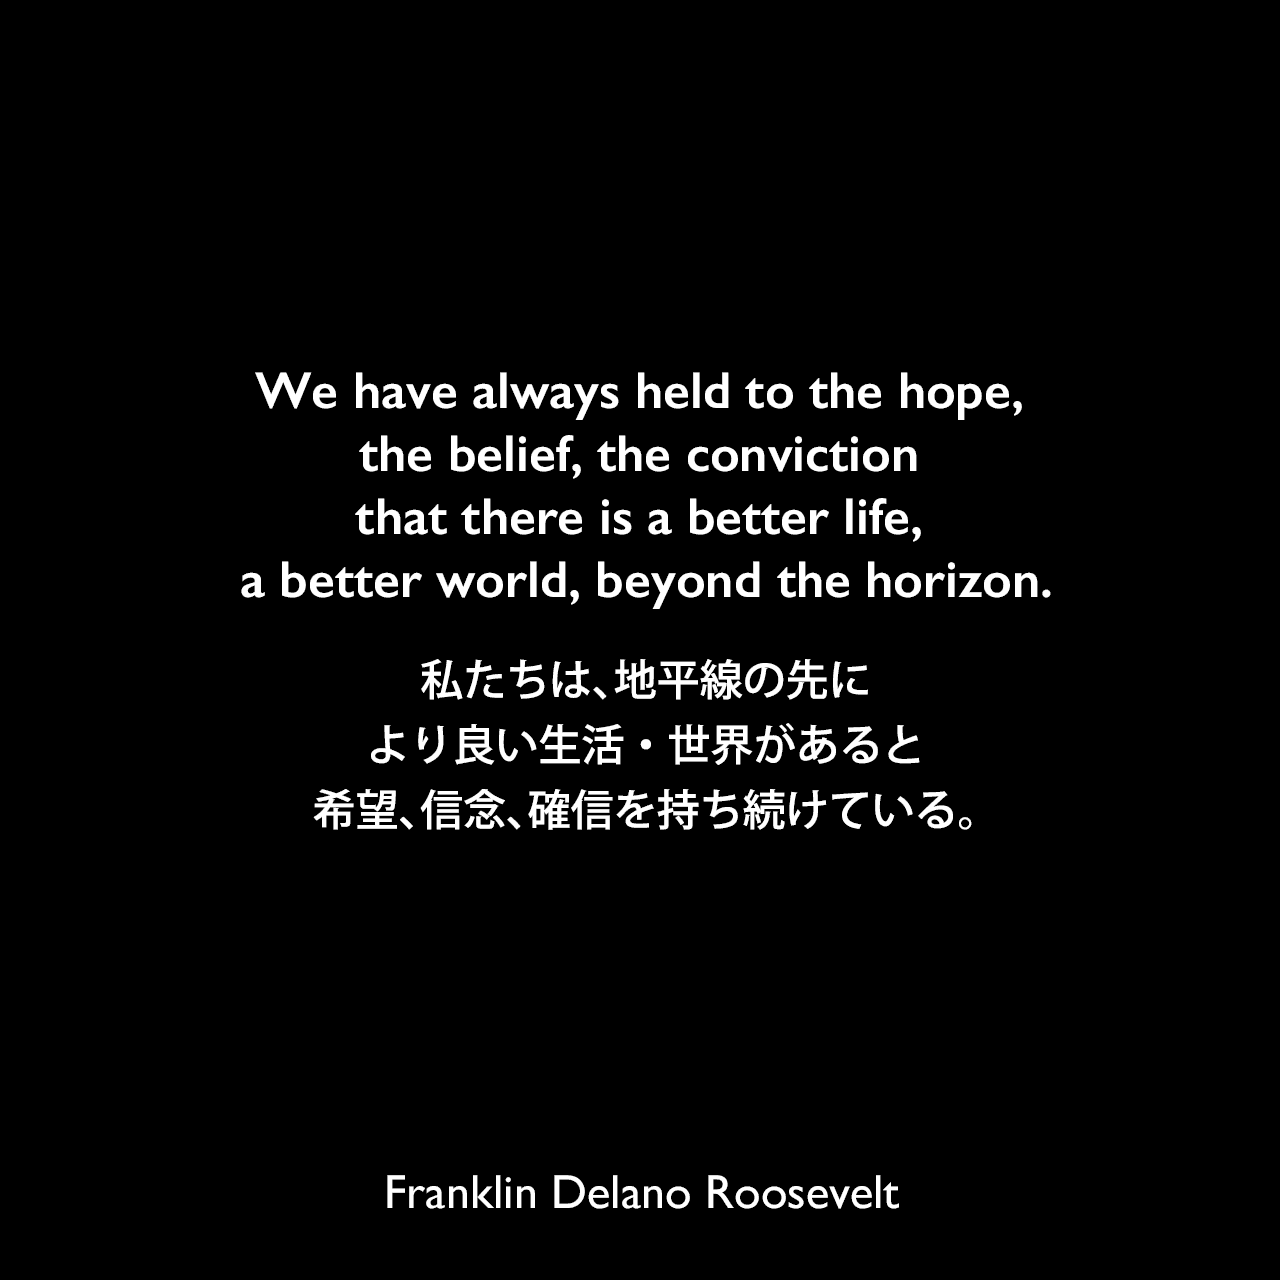 We have always held to the hope, the belief, the conviction that there is a better life, a better world, beyond the horizon.私たちは、地平線の先に、より良い生活・世界があると希望、信念、確信を持ち続けている。Franklin Delano Roosevelt